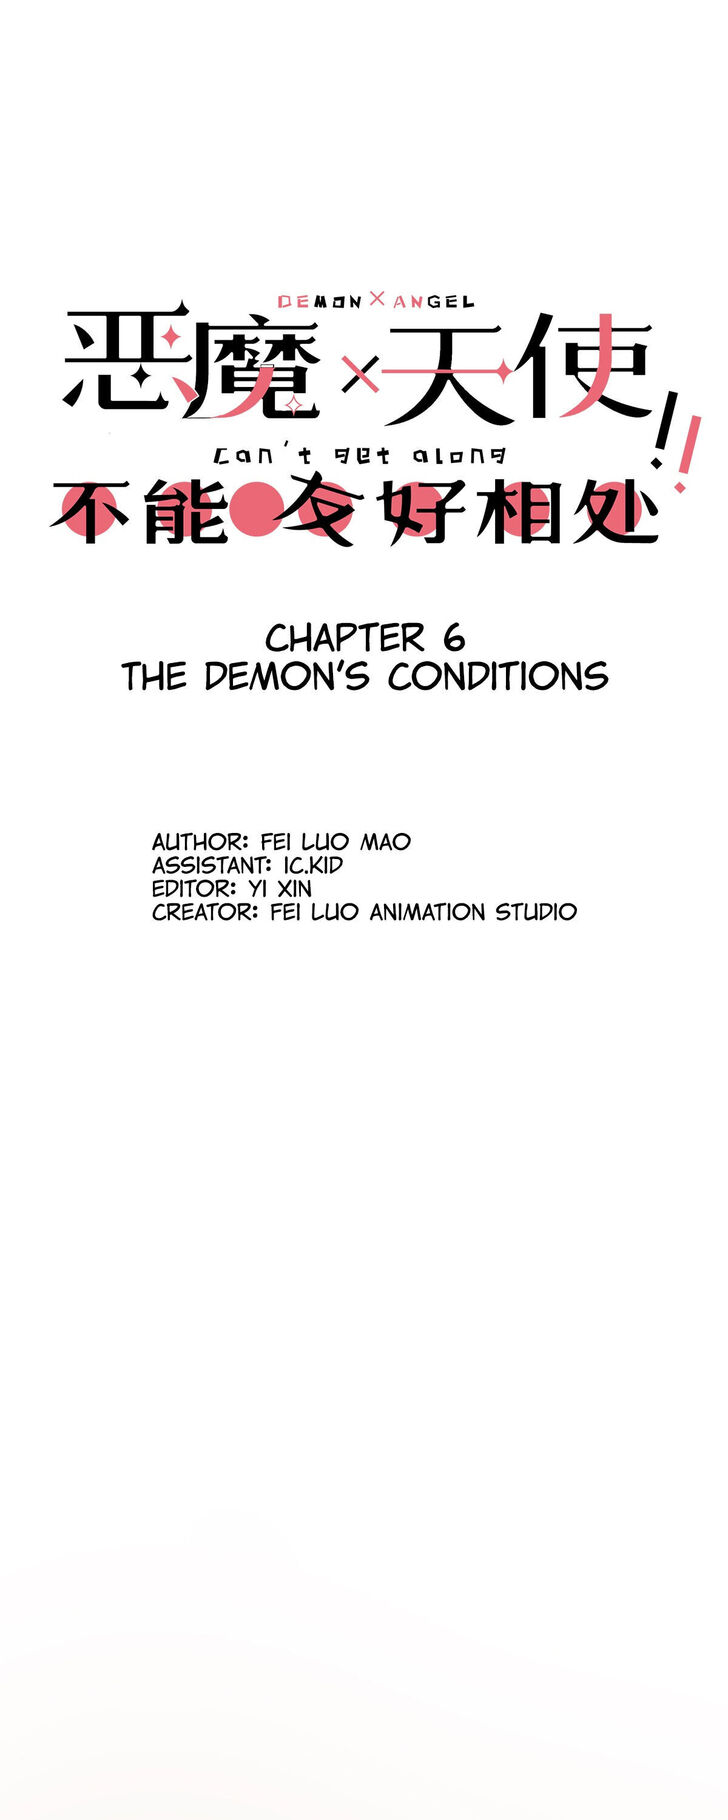 Demon X Angel, Can't Get Along! Demon X Angel, Can't Get Along! Ch.006